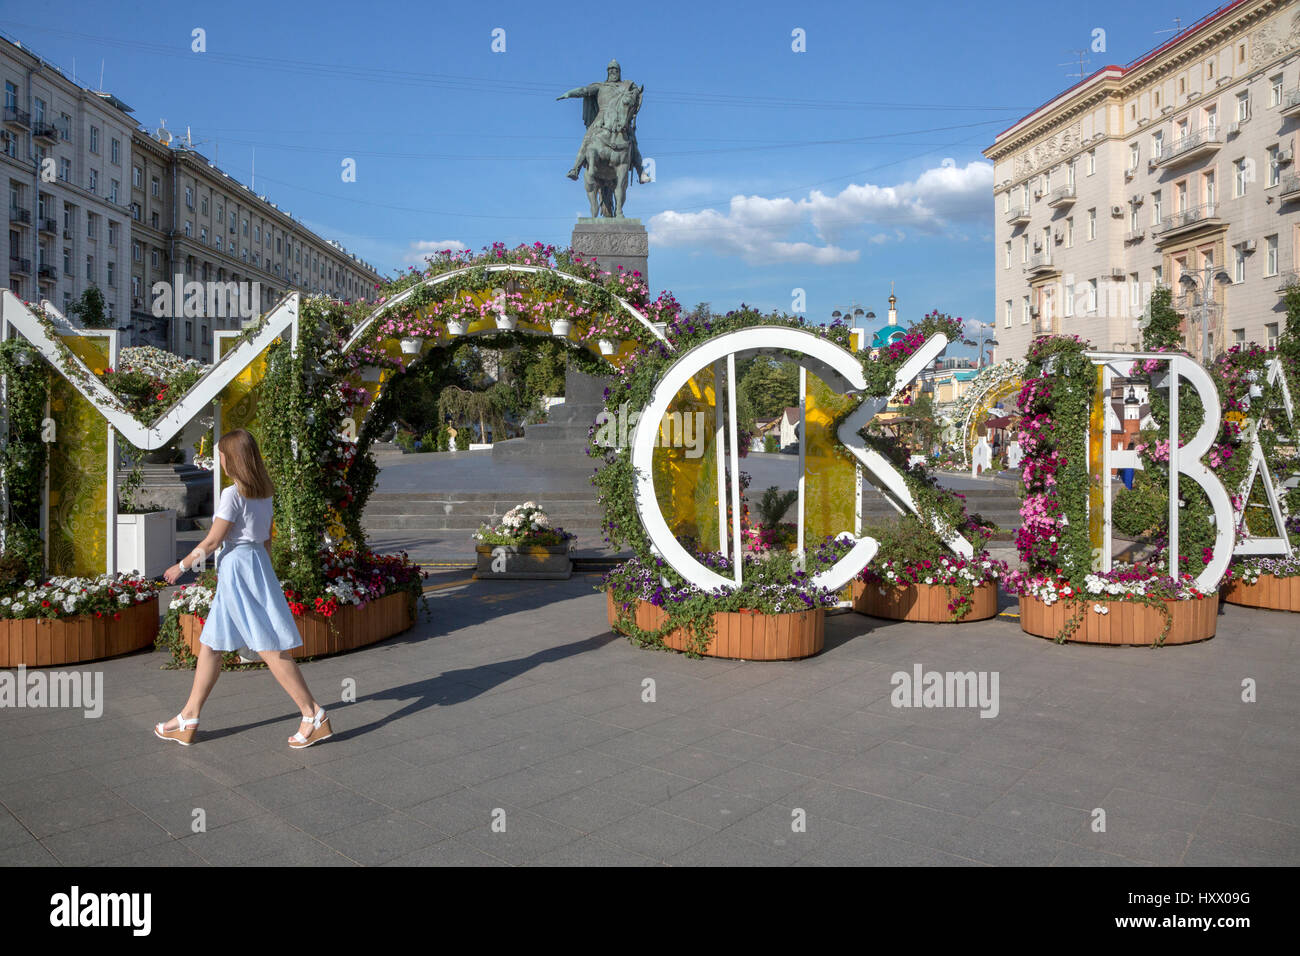 View of the monument to Yury Dolgoruky on Tverskaya Street in Moscow with flowers decoration on summer season festival, Russia Stock Photo